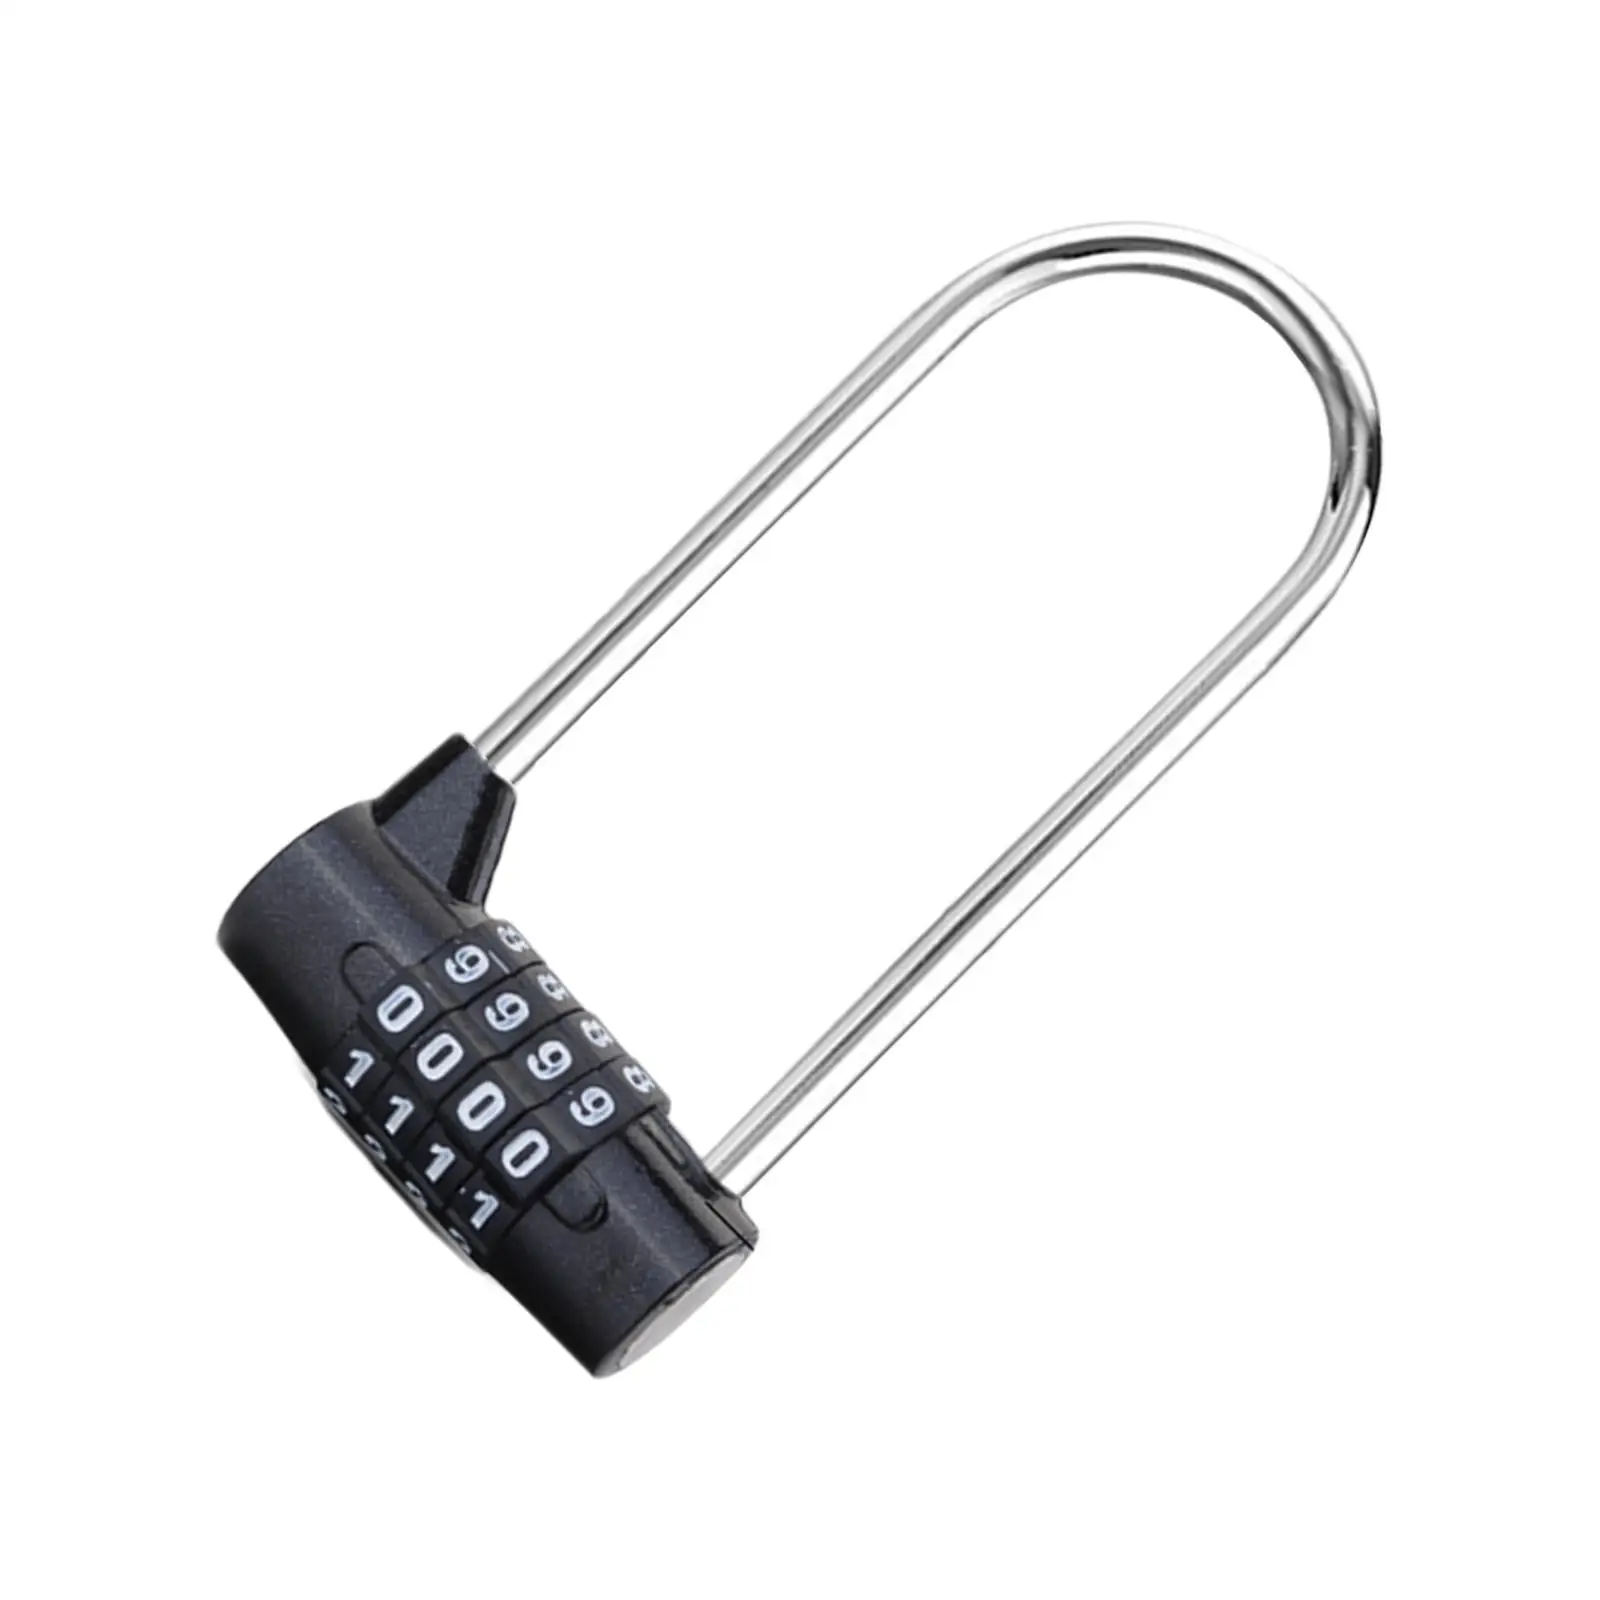 4 Digit Combination Padlock Outdoor Safety Lock Pad Lock with Long Shackle Password Lock for Gym Door Toolbox Hasp Cabinet Gate